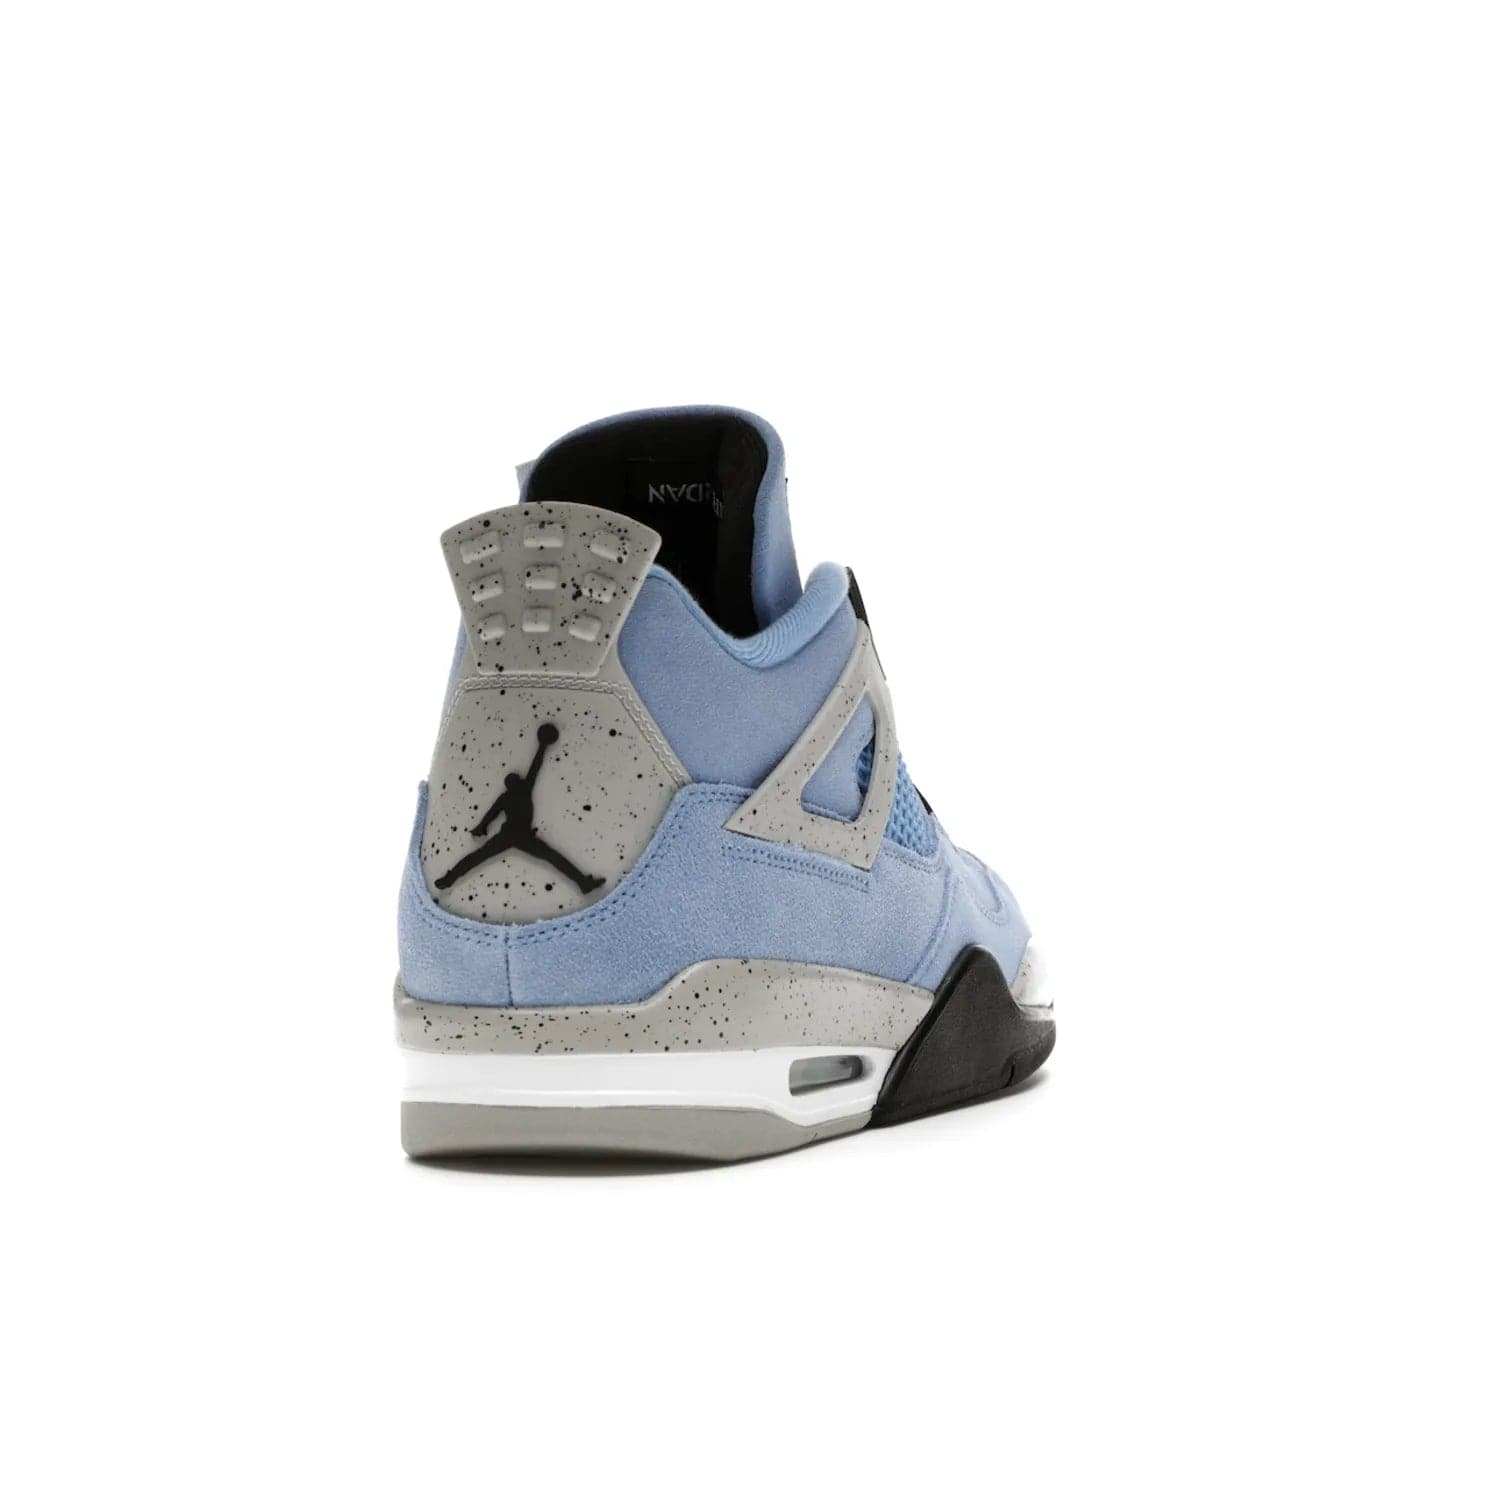 Jordan 4 Retro University Blue - Image 30 - Only at www.BallersClubKickz.com - The Air Jordan 4 University Blue honors MJ's alma mater. Rich University Blue suede, panels of netting, and Cement Grey speckled eyelets give this design an edgy look. Features a black, white and Tech Grey sole with a clear Air unit and two woven labels on the tongue. Jumpman logo & Team Jordan jock tag included. Released April 2021.